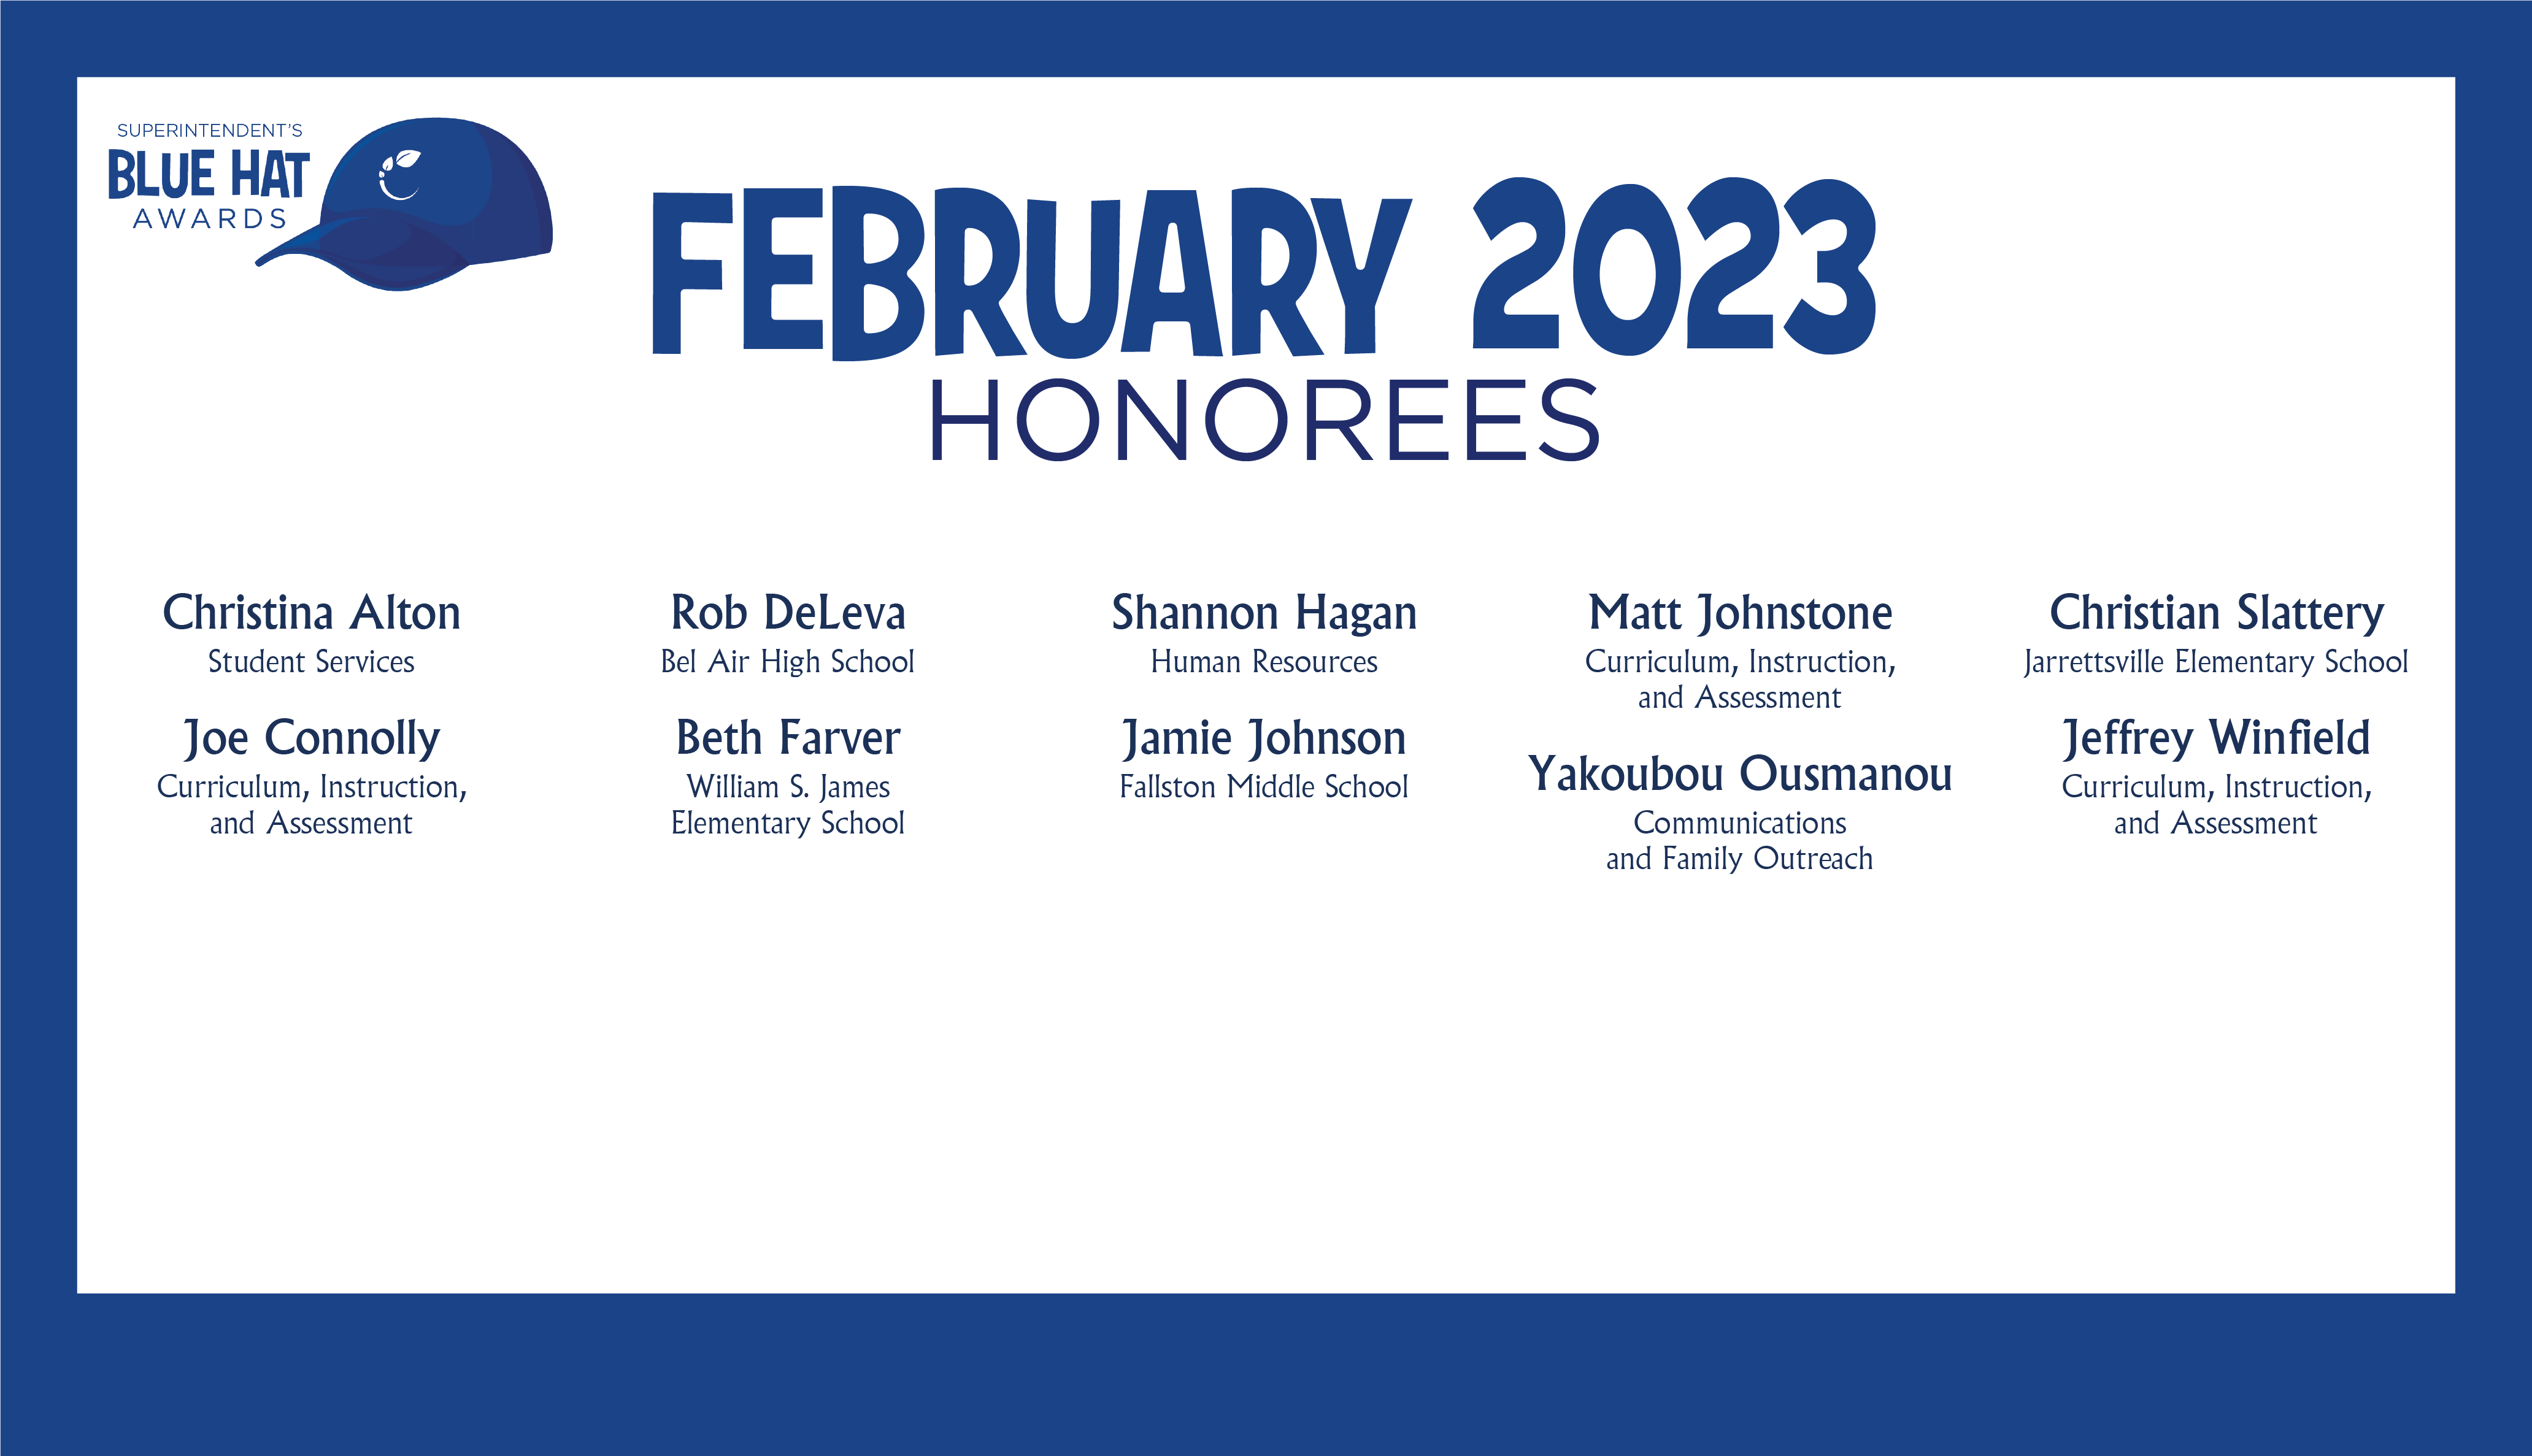 HCPS Blue Hat Honorees - February 2023